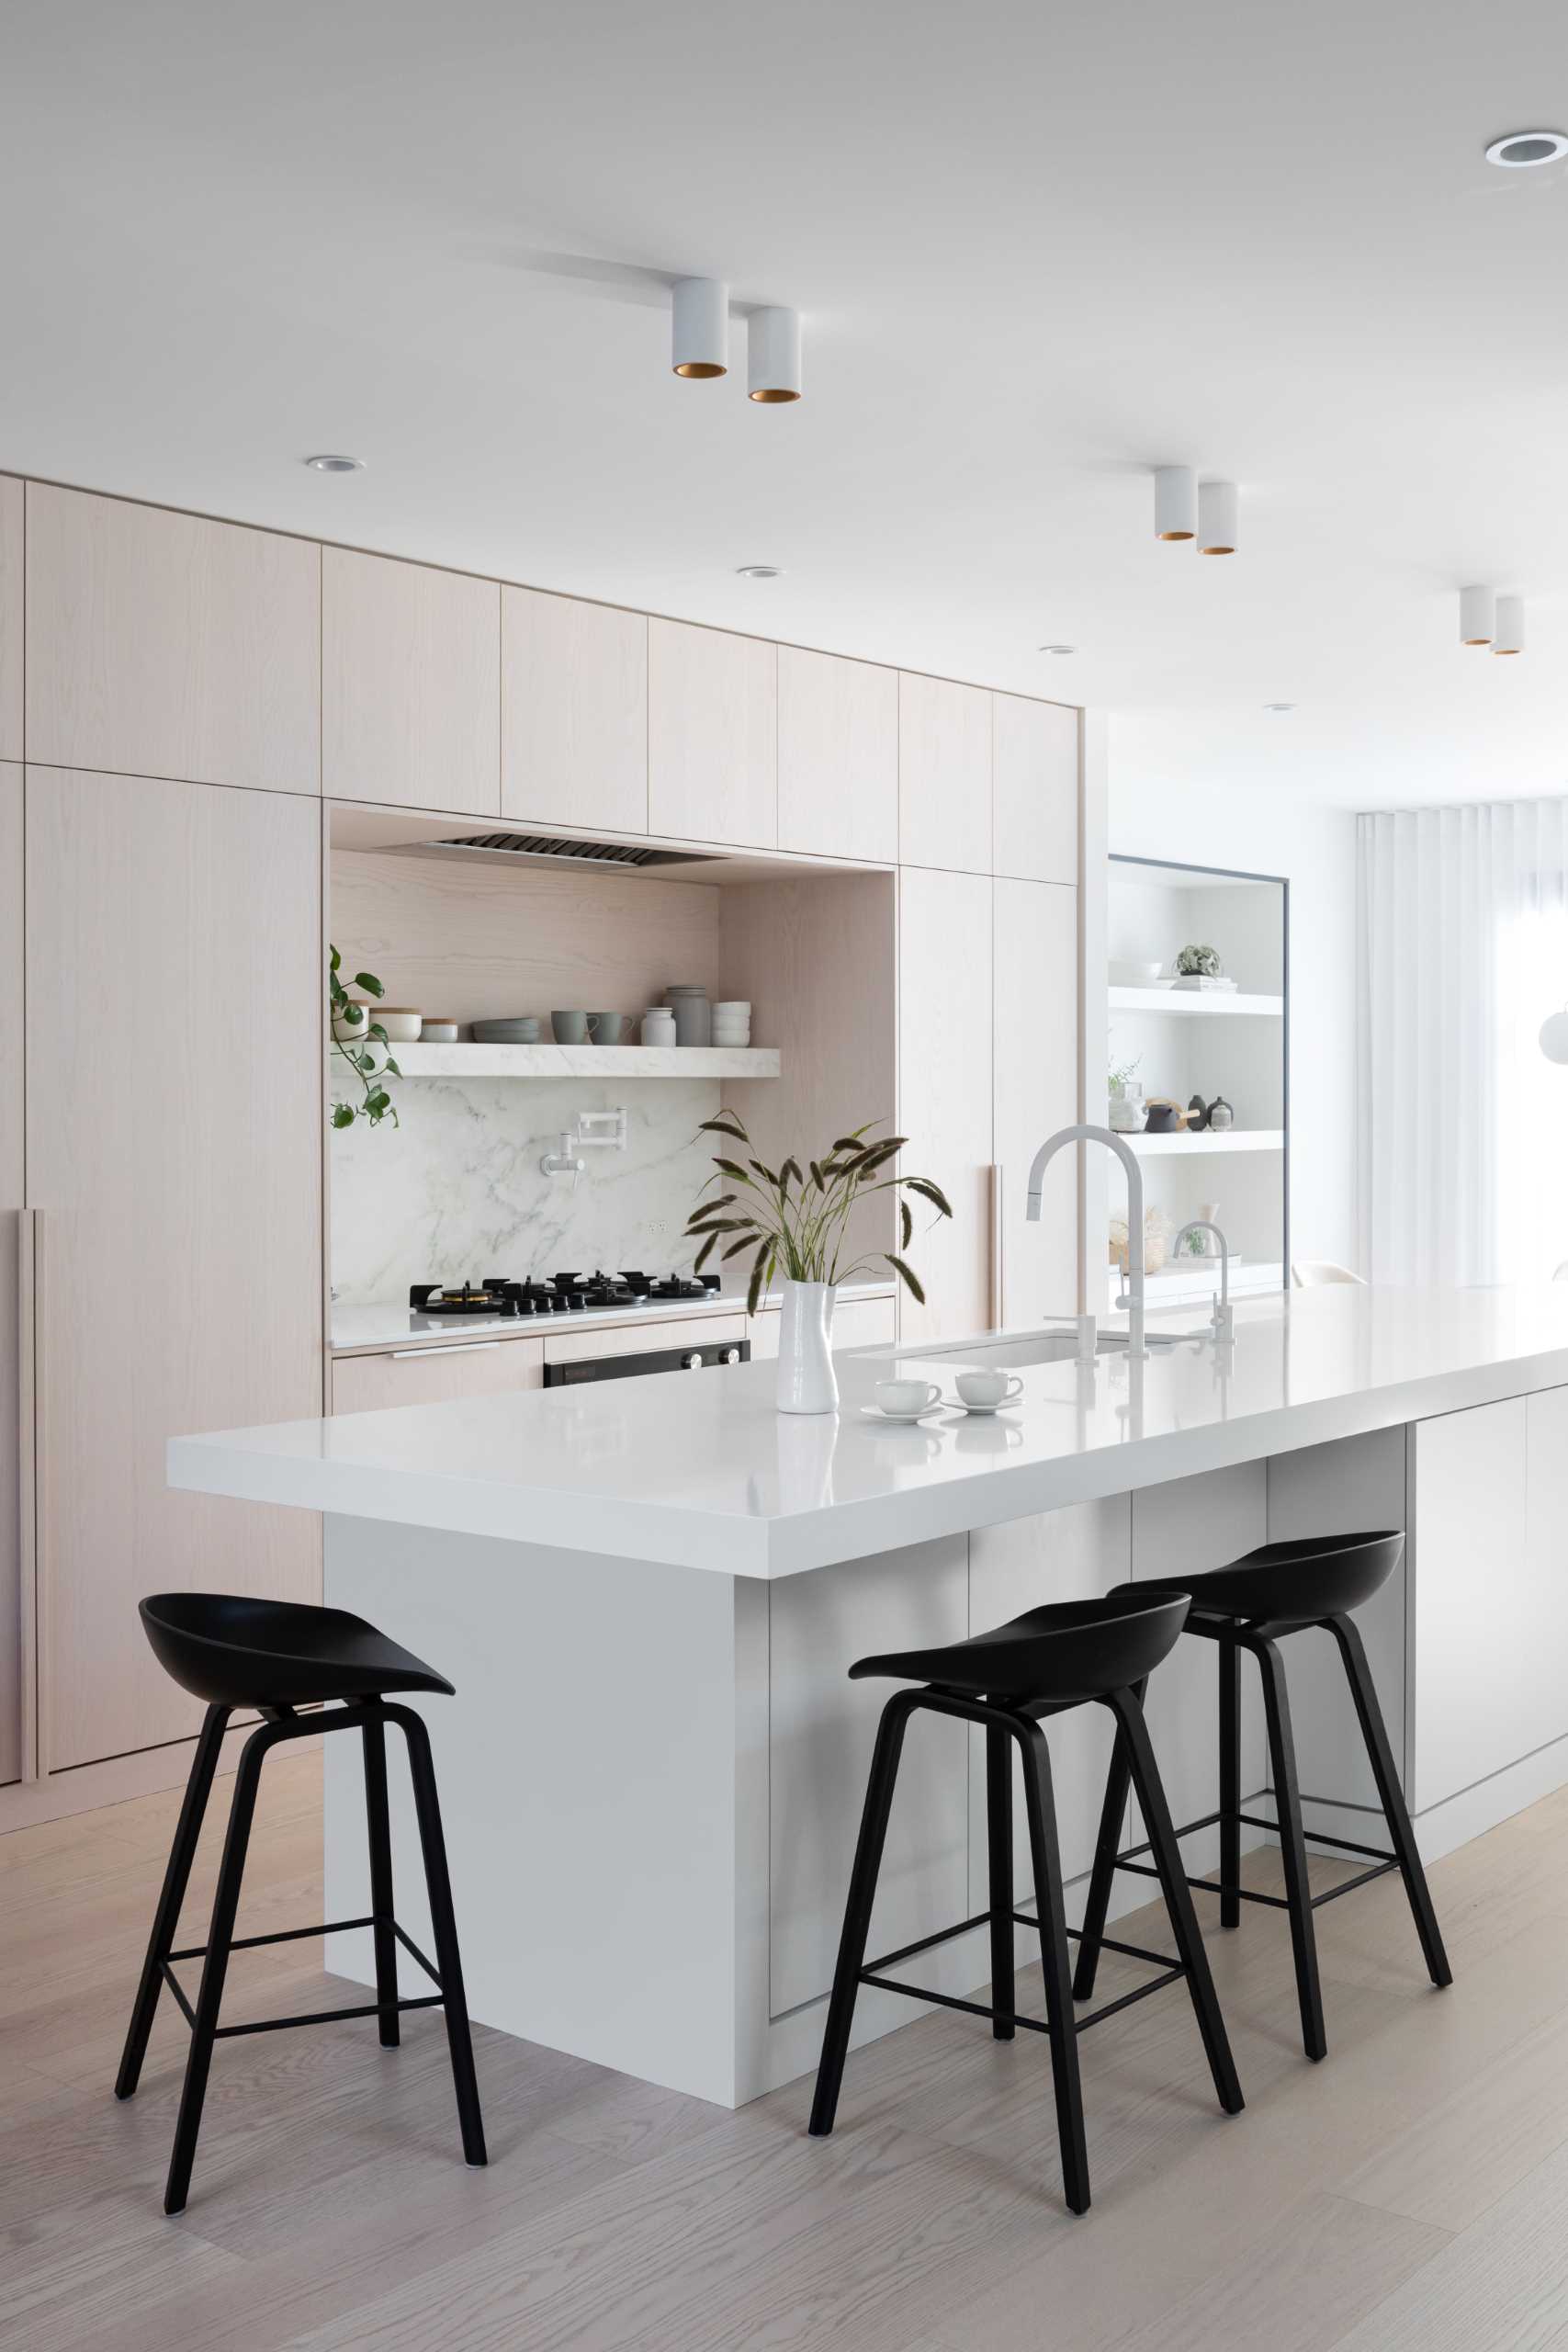 In this modern kitchen, there's white stained oak, cool white marble, and black accents.